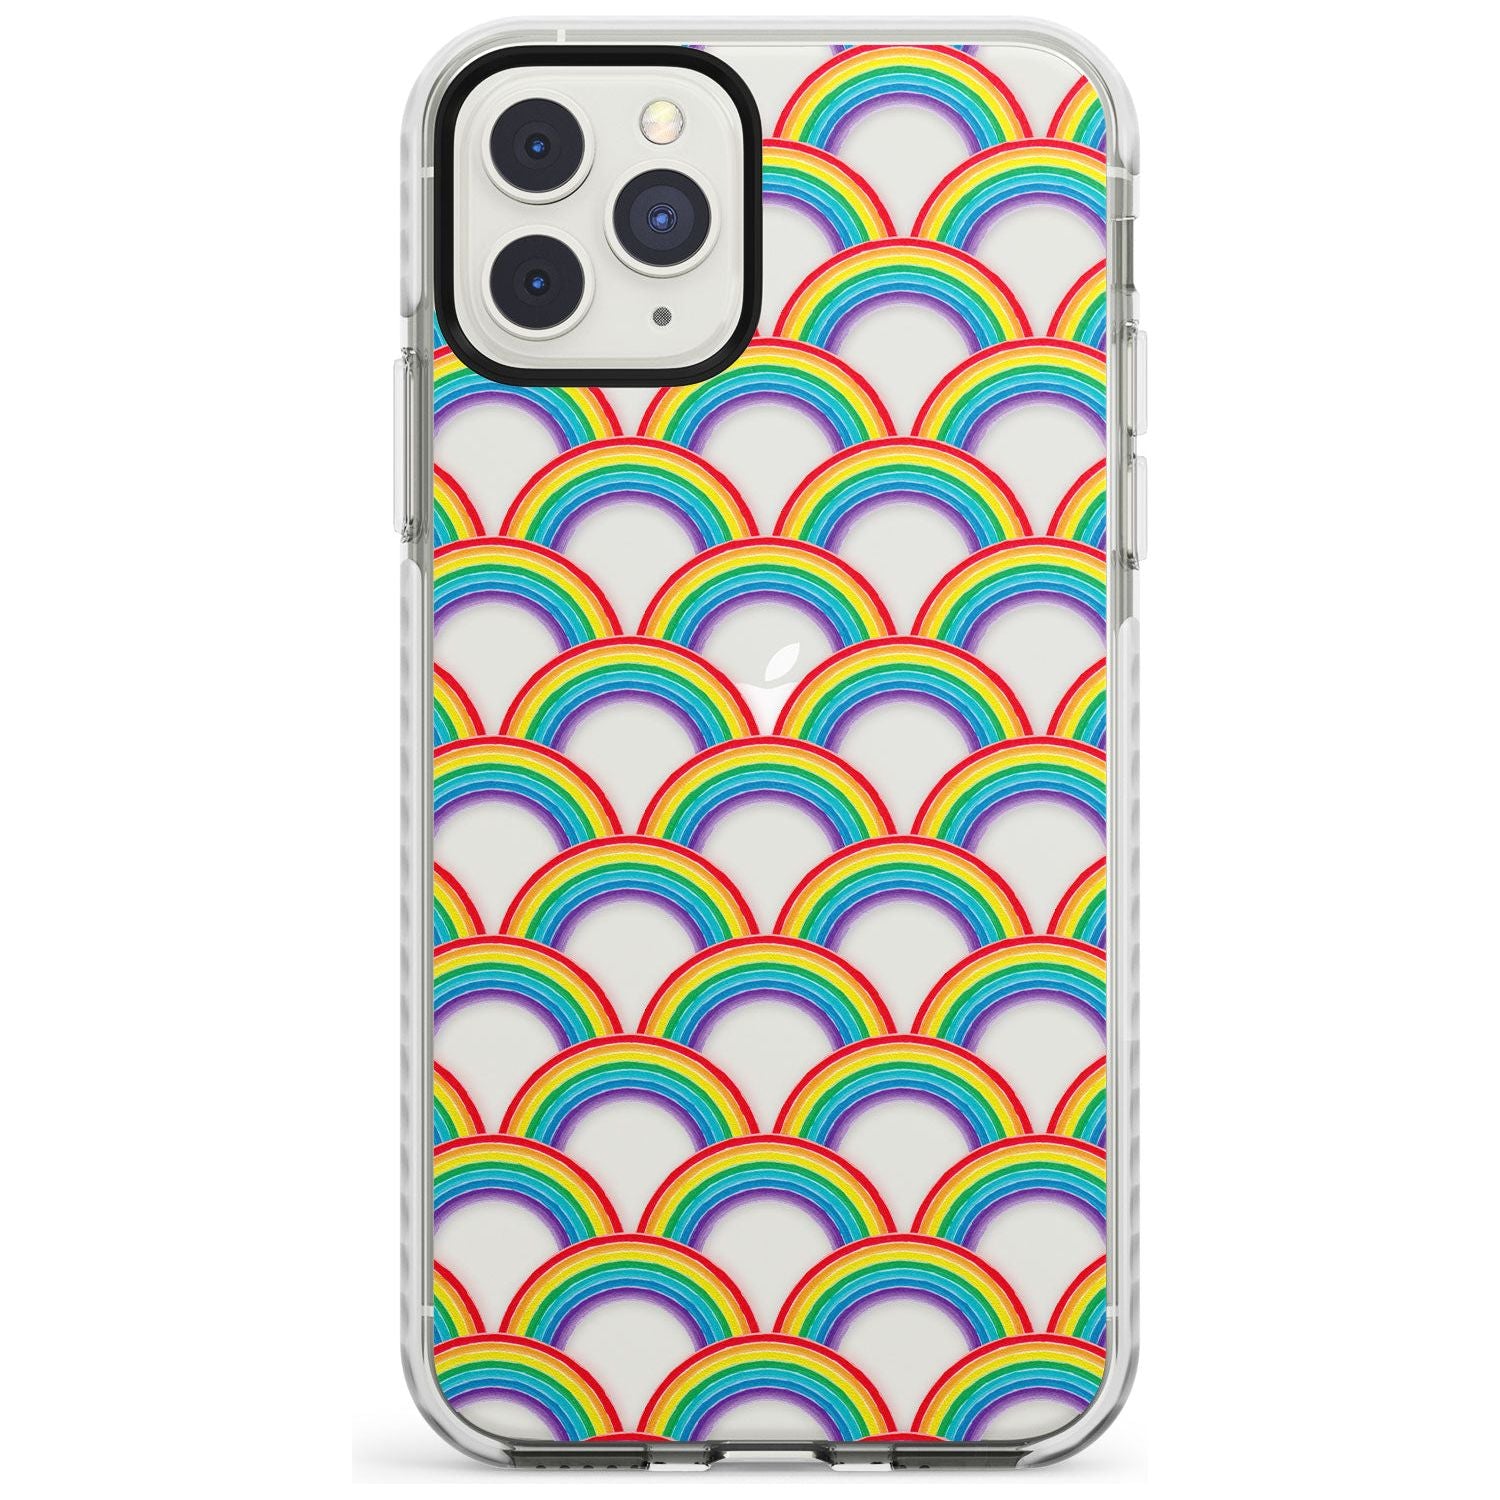 Somewhere over the rainbow Impact Phone Case for iPhone 11 Pro Max